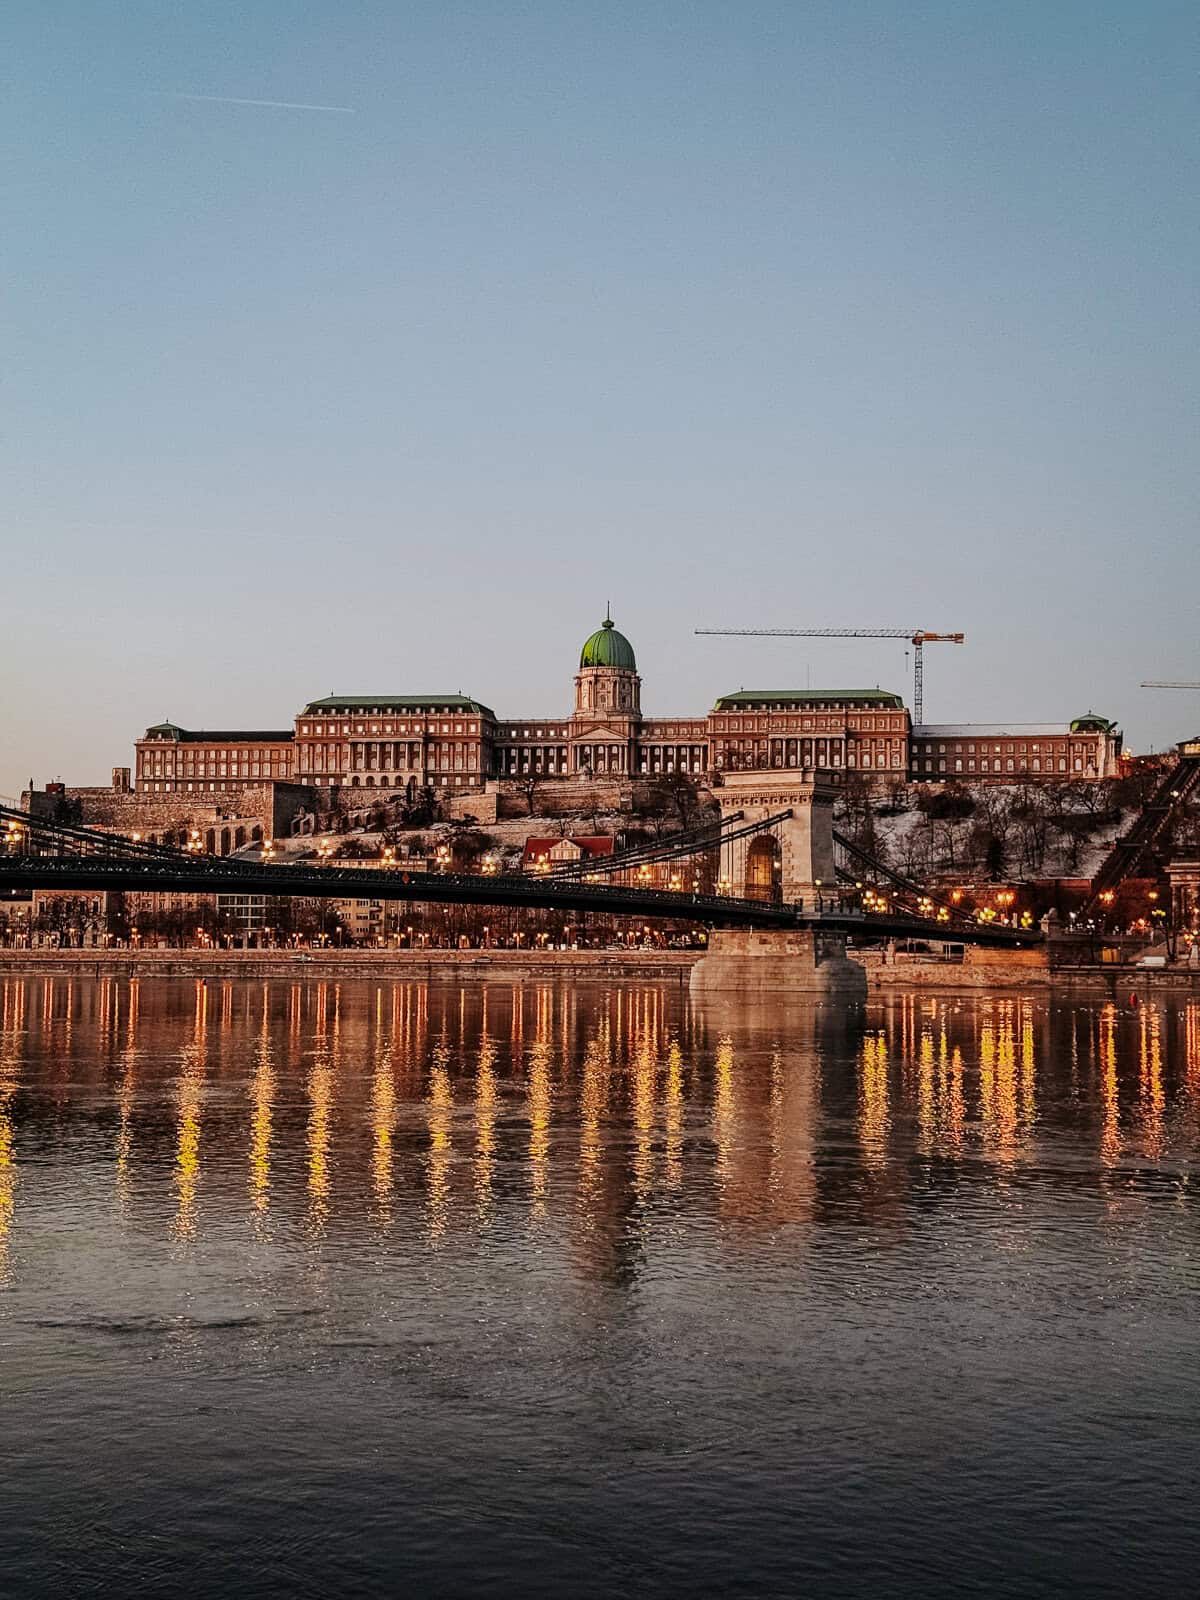 The Buda Castle in Budapest at dusk, with the Chain Bridge in the foreground, reflecting the warm lights on the Danube River.